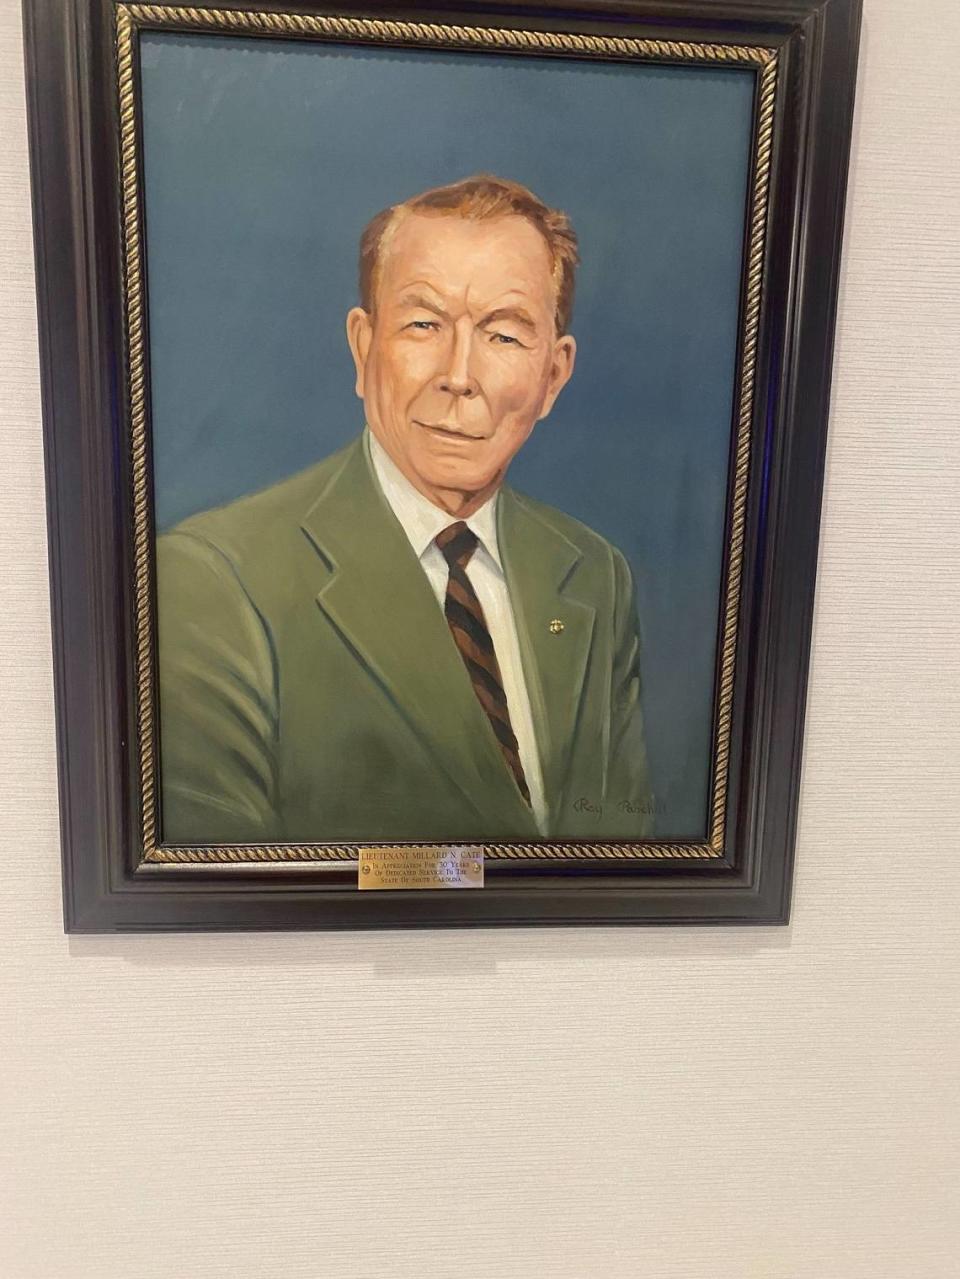 Millard Cate was hired in 1947 to be SLED’s first one-man crime lab operator. His portrait hangs in SLED’s new crime lab.